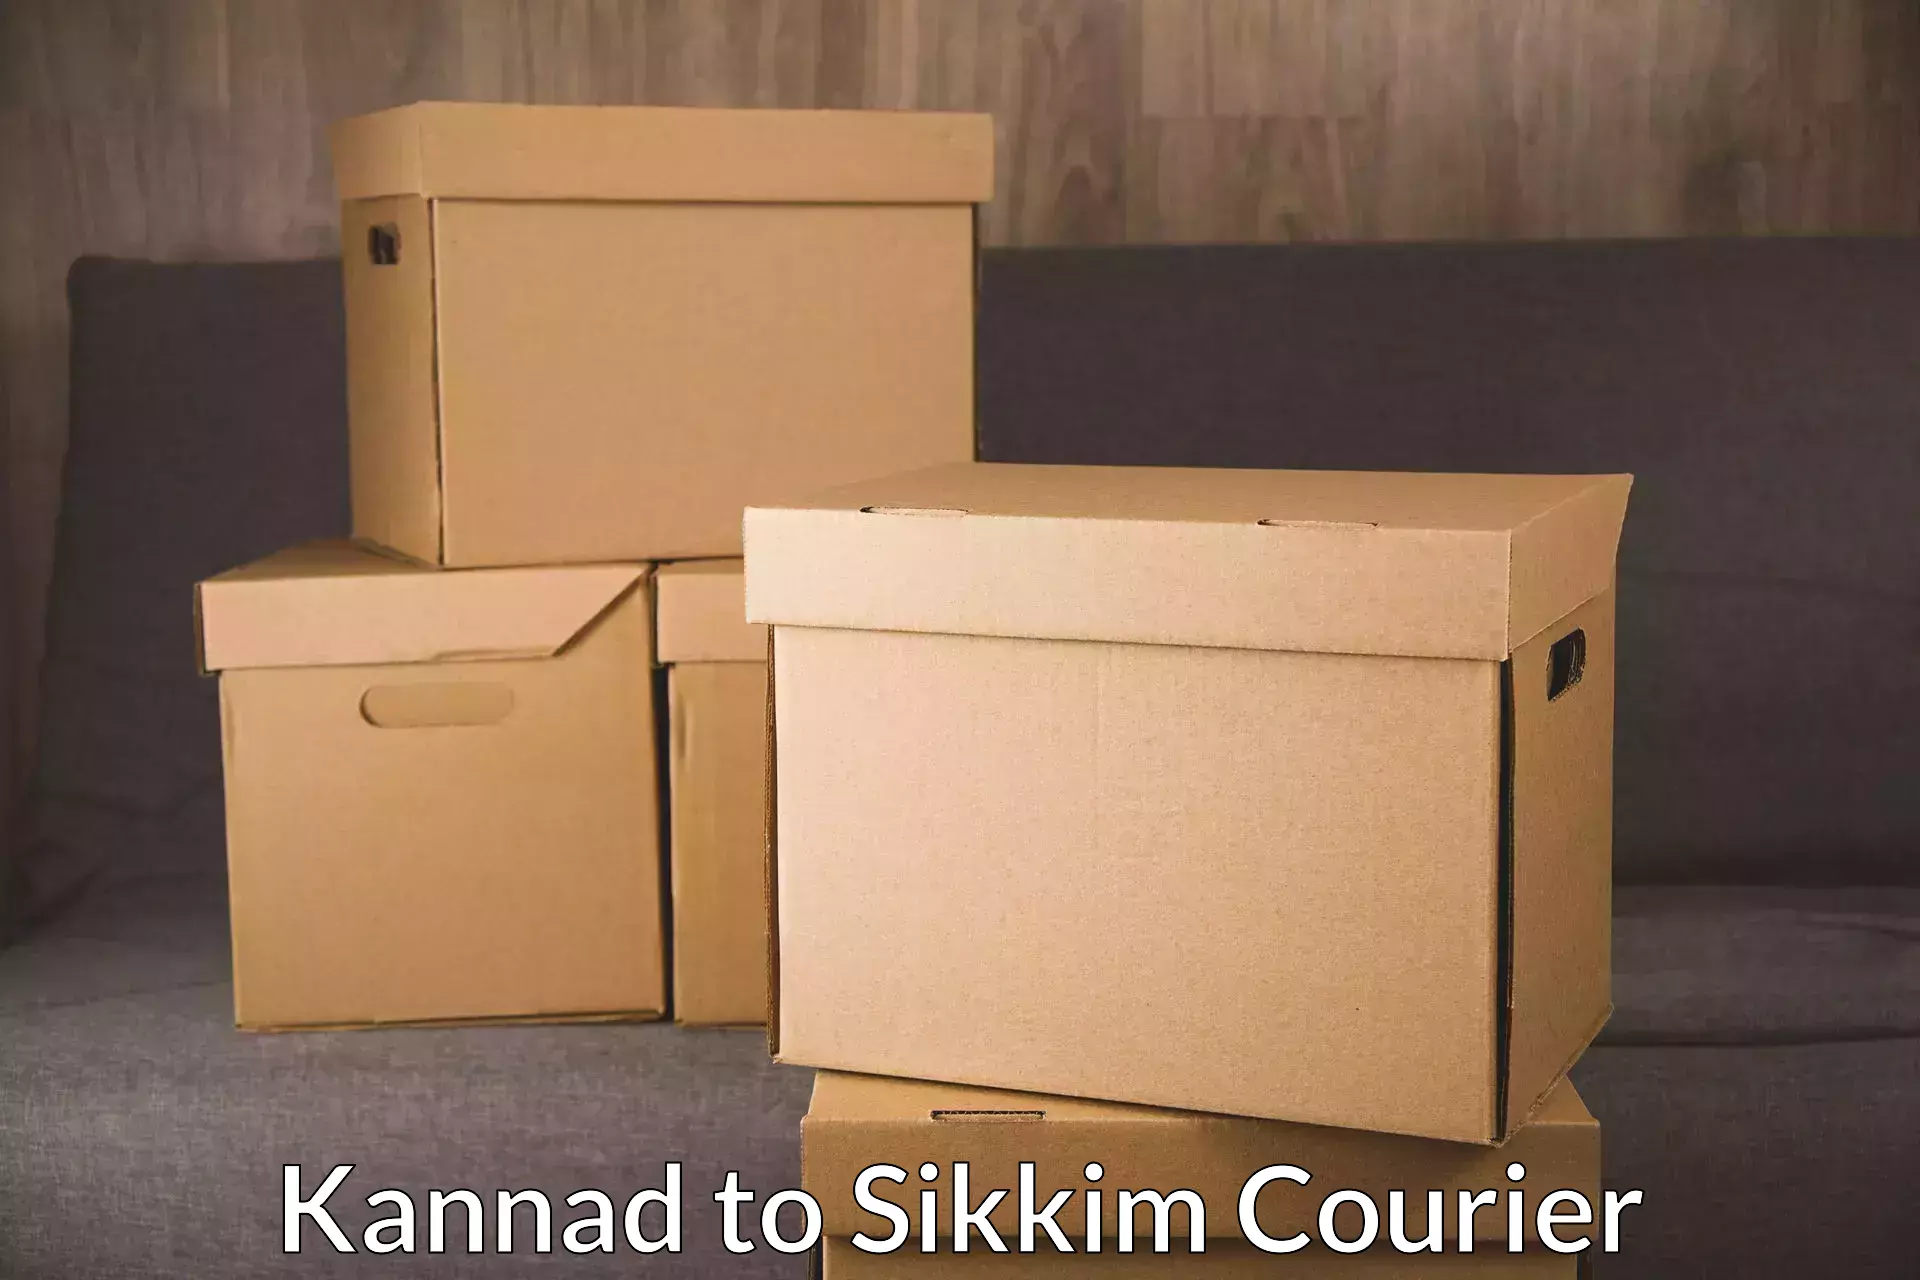 Courier service partnerships Kannad to Pelling